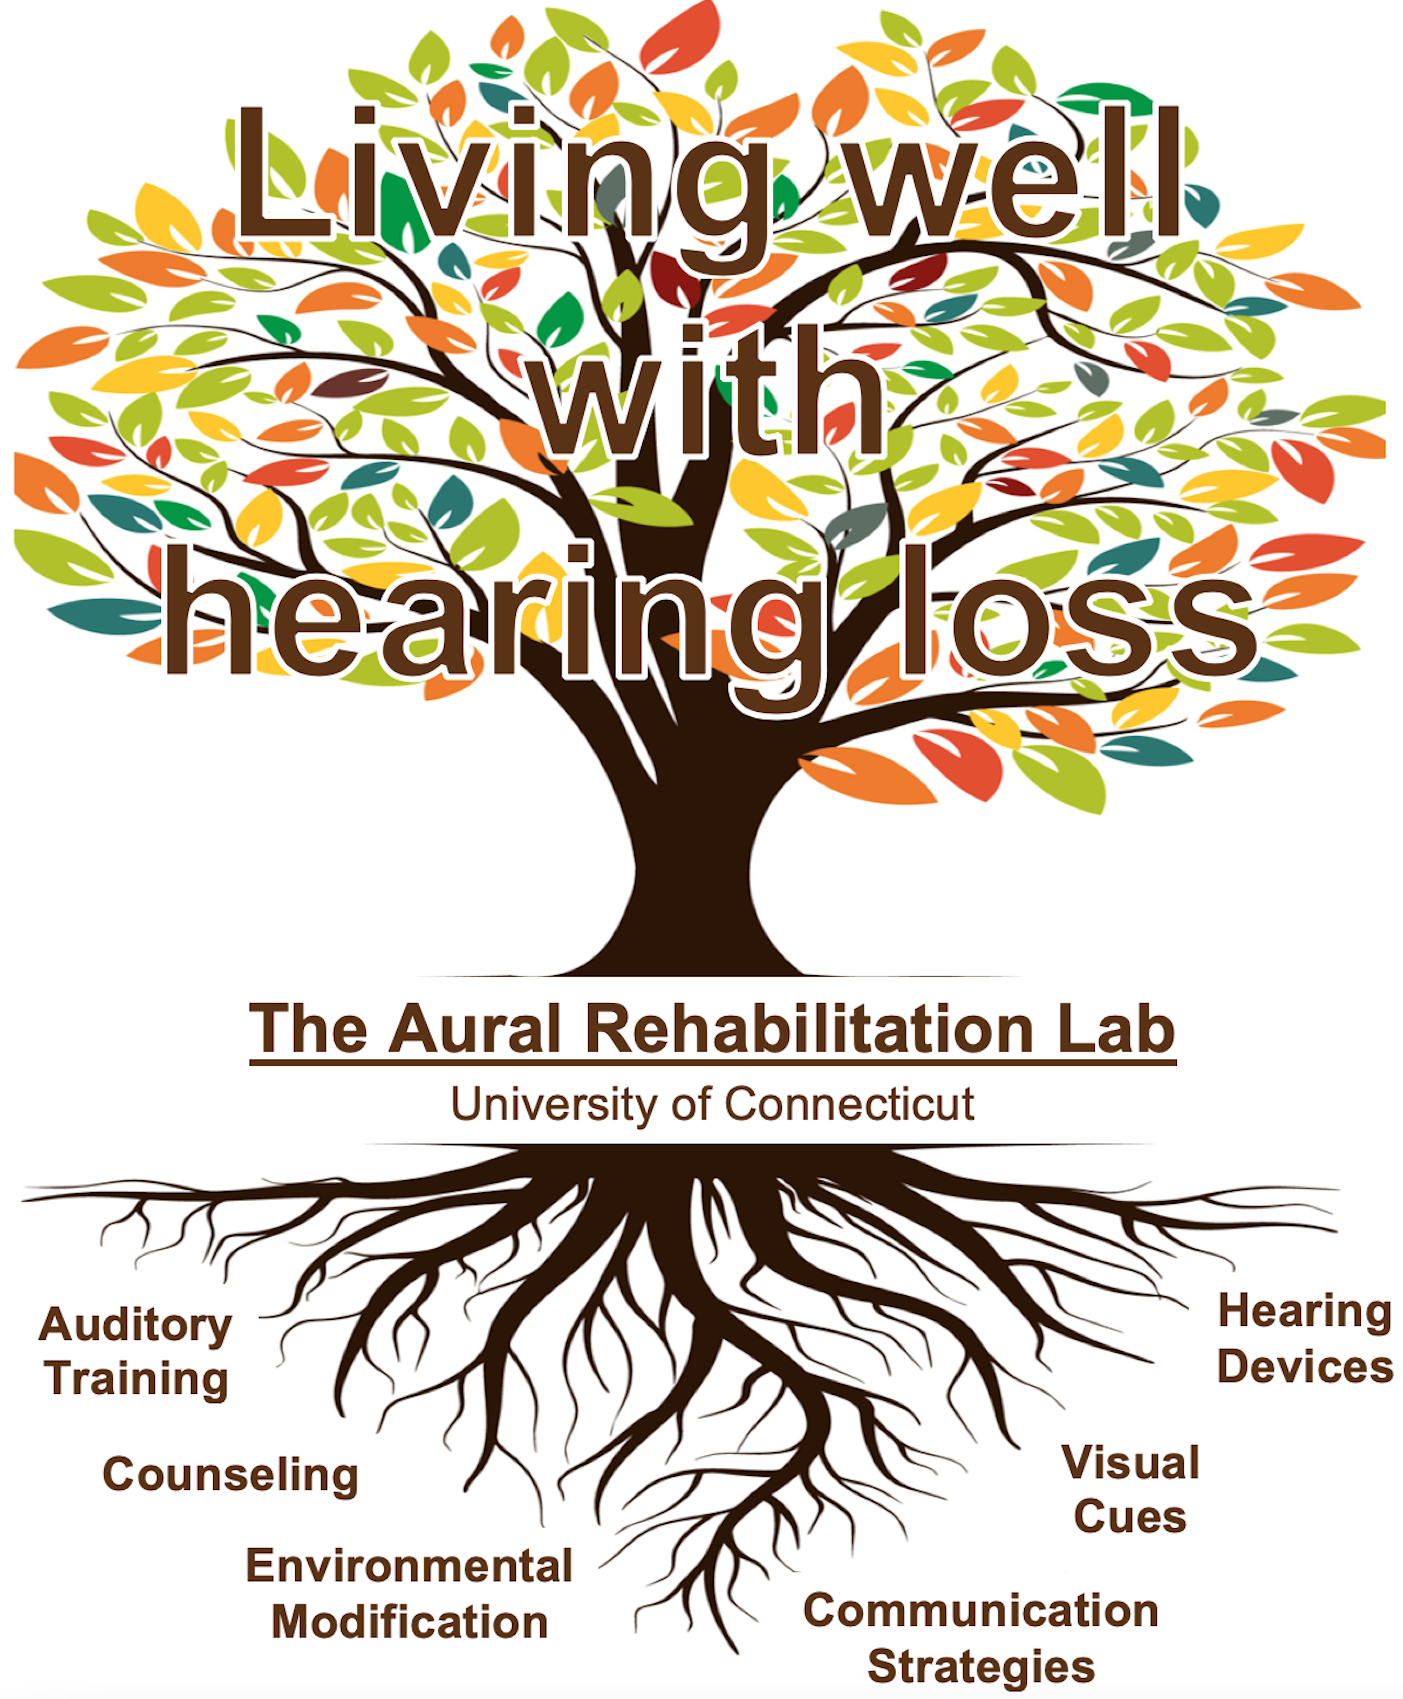 tree diagram with the roots including auditory training, counseling, environmental modifications, communication strats, visual cues, and hearing devices with the Aural Rehabilitation Lab University of Connecticut, and Living well with hearing loss in the leaves